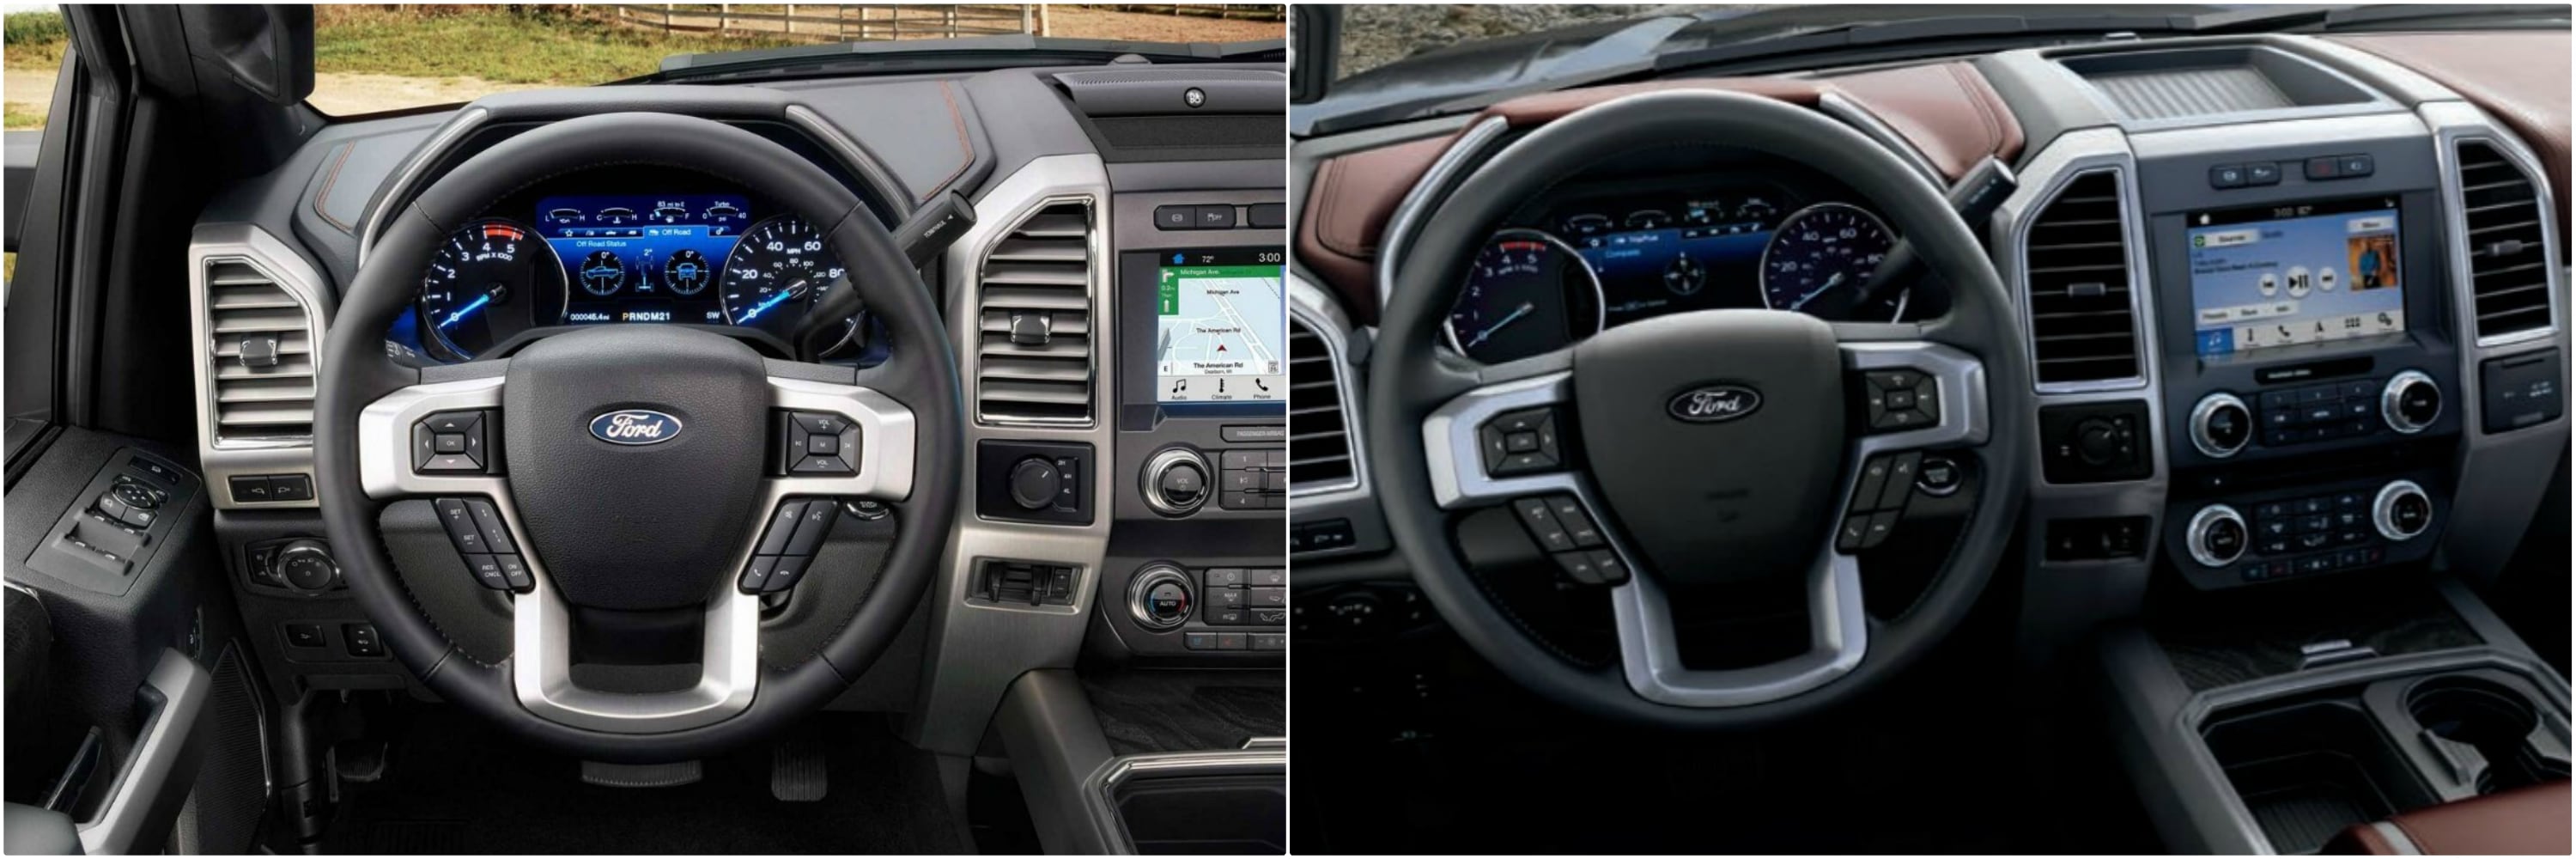 the interior dashboard view of a 2019 vs. 2018 Ford Super Duty truck